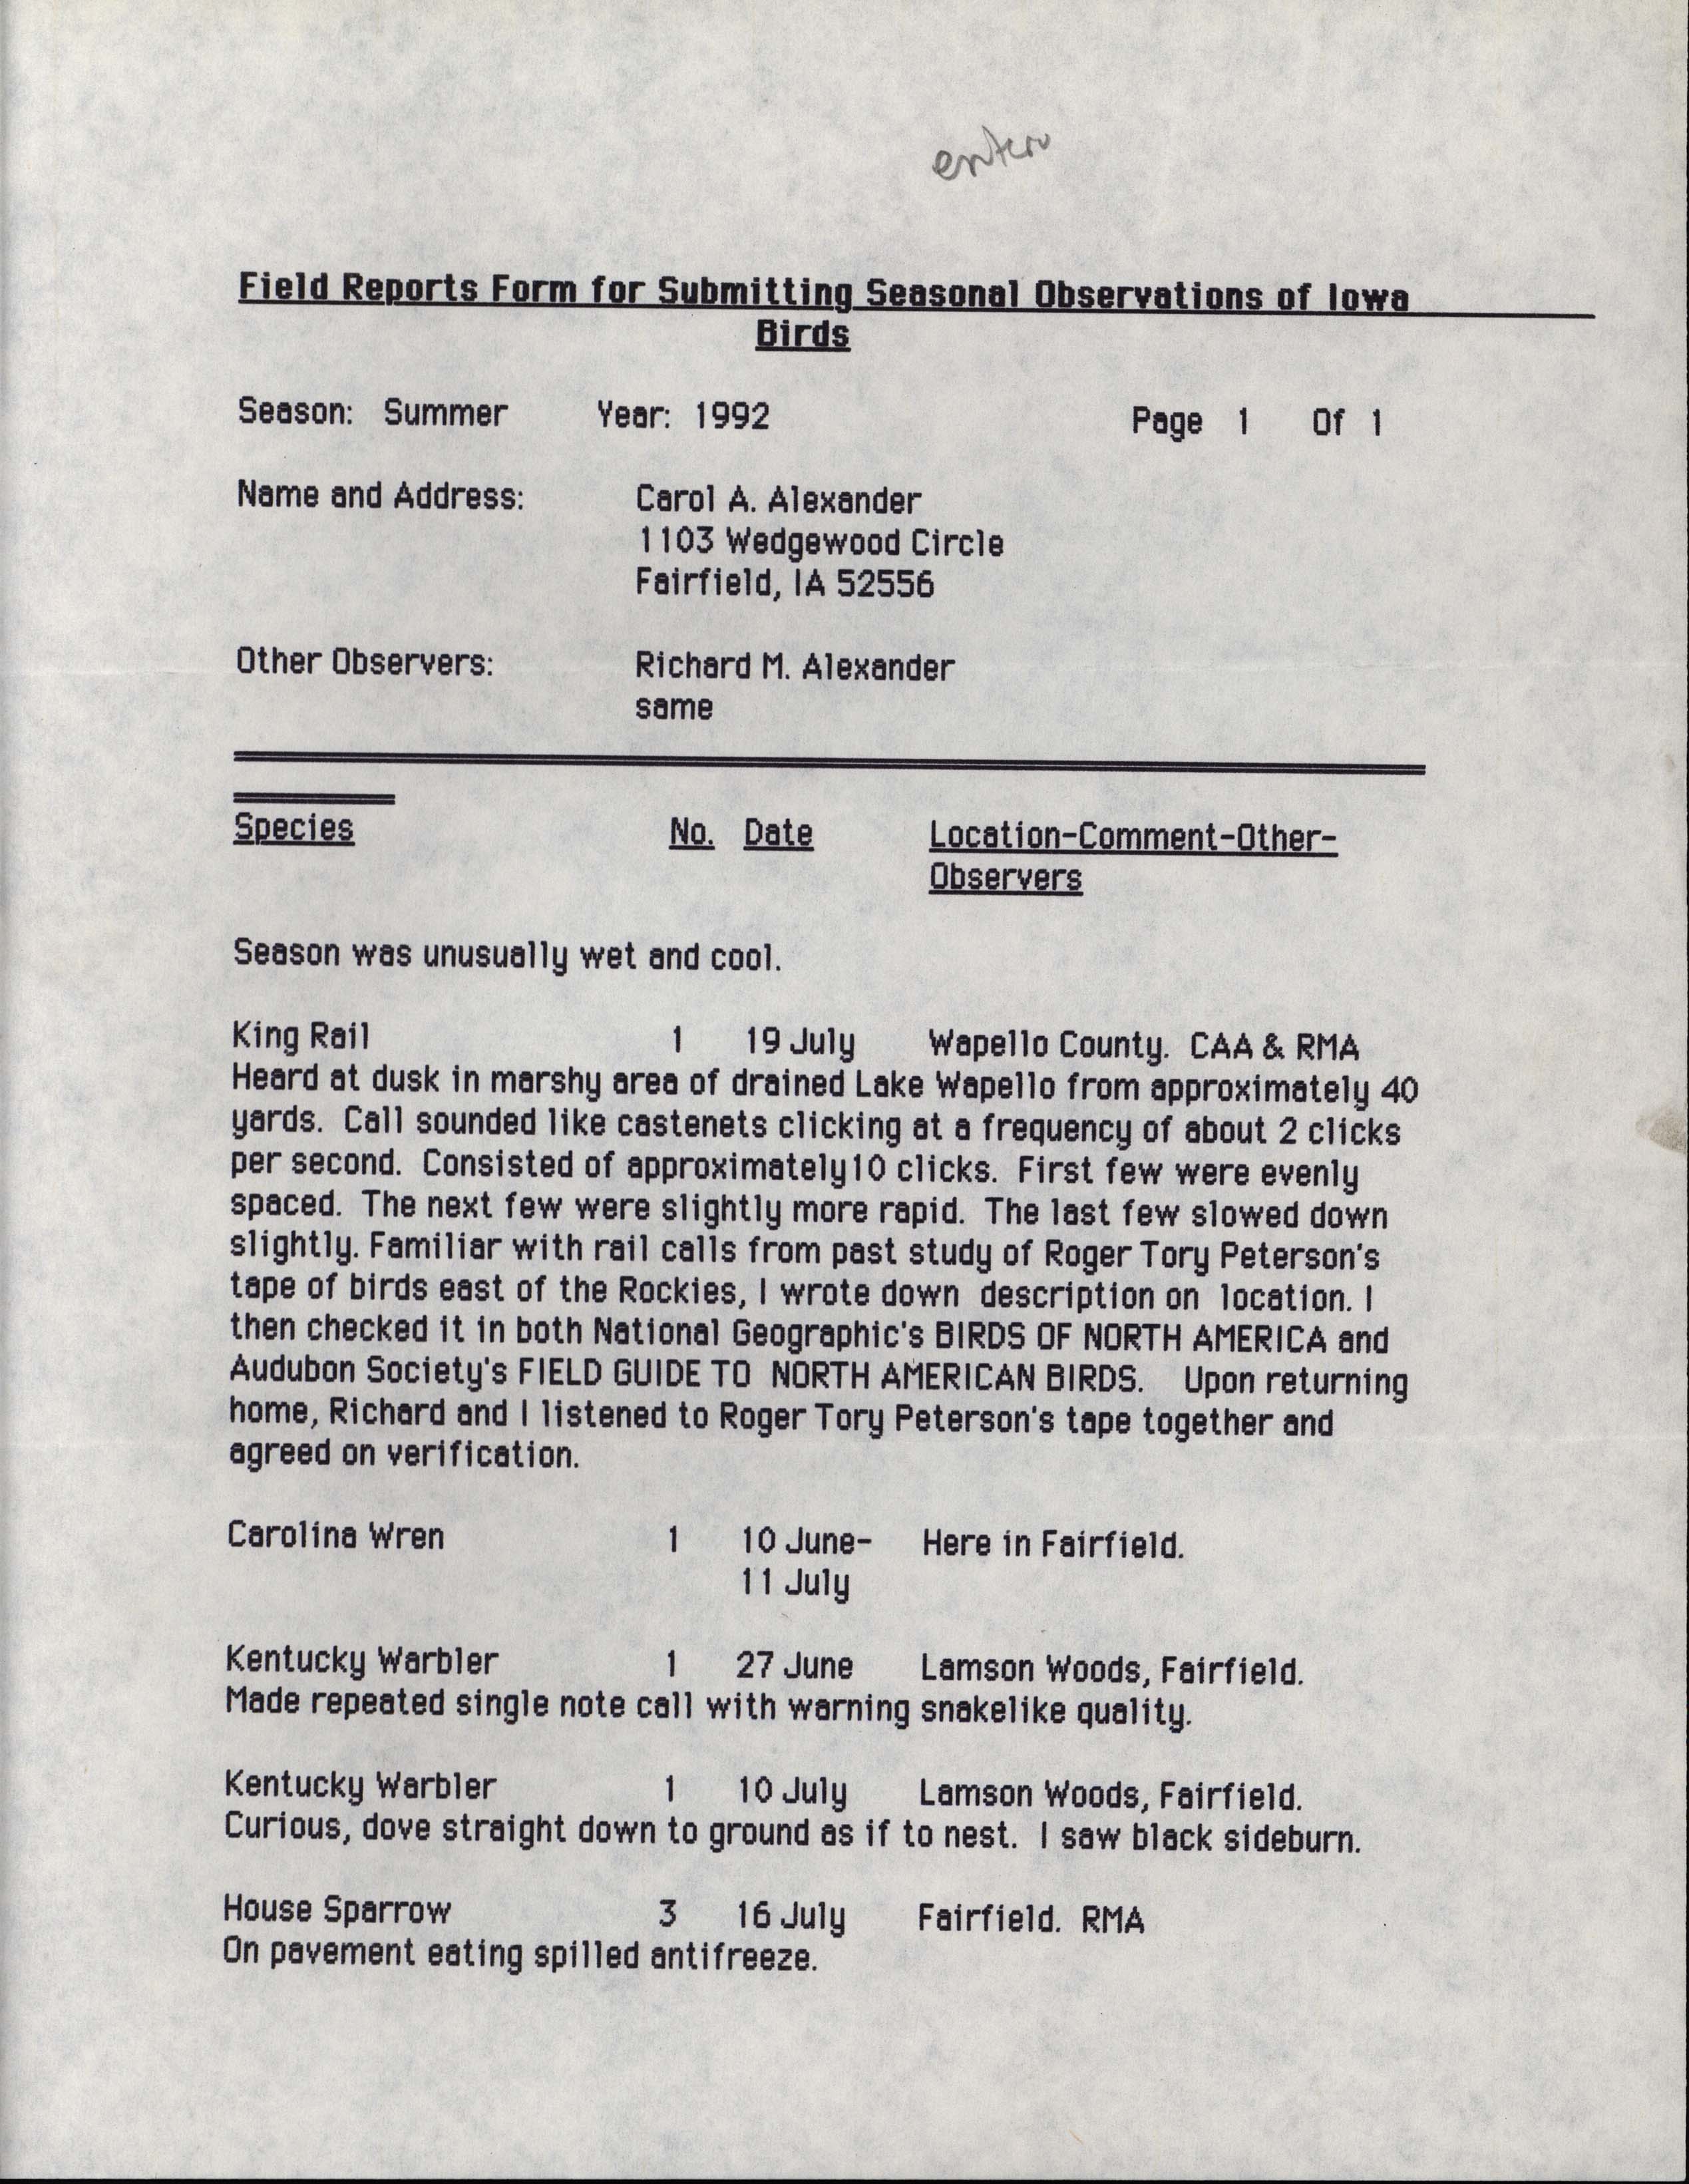 Field reports form for submitting seasonal observations of Iowa birds, Carol Ann Alexander, summer 1992